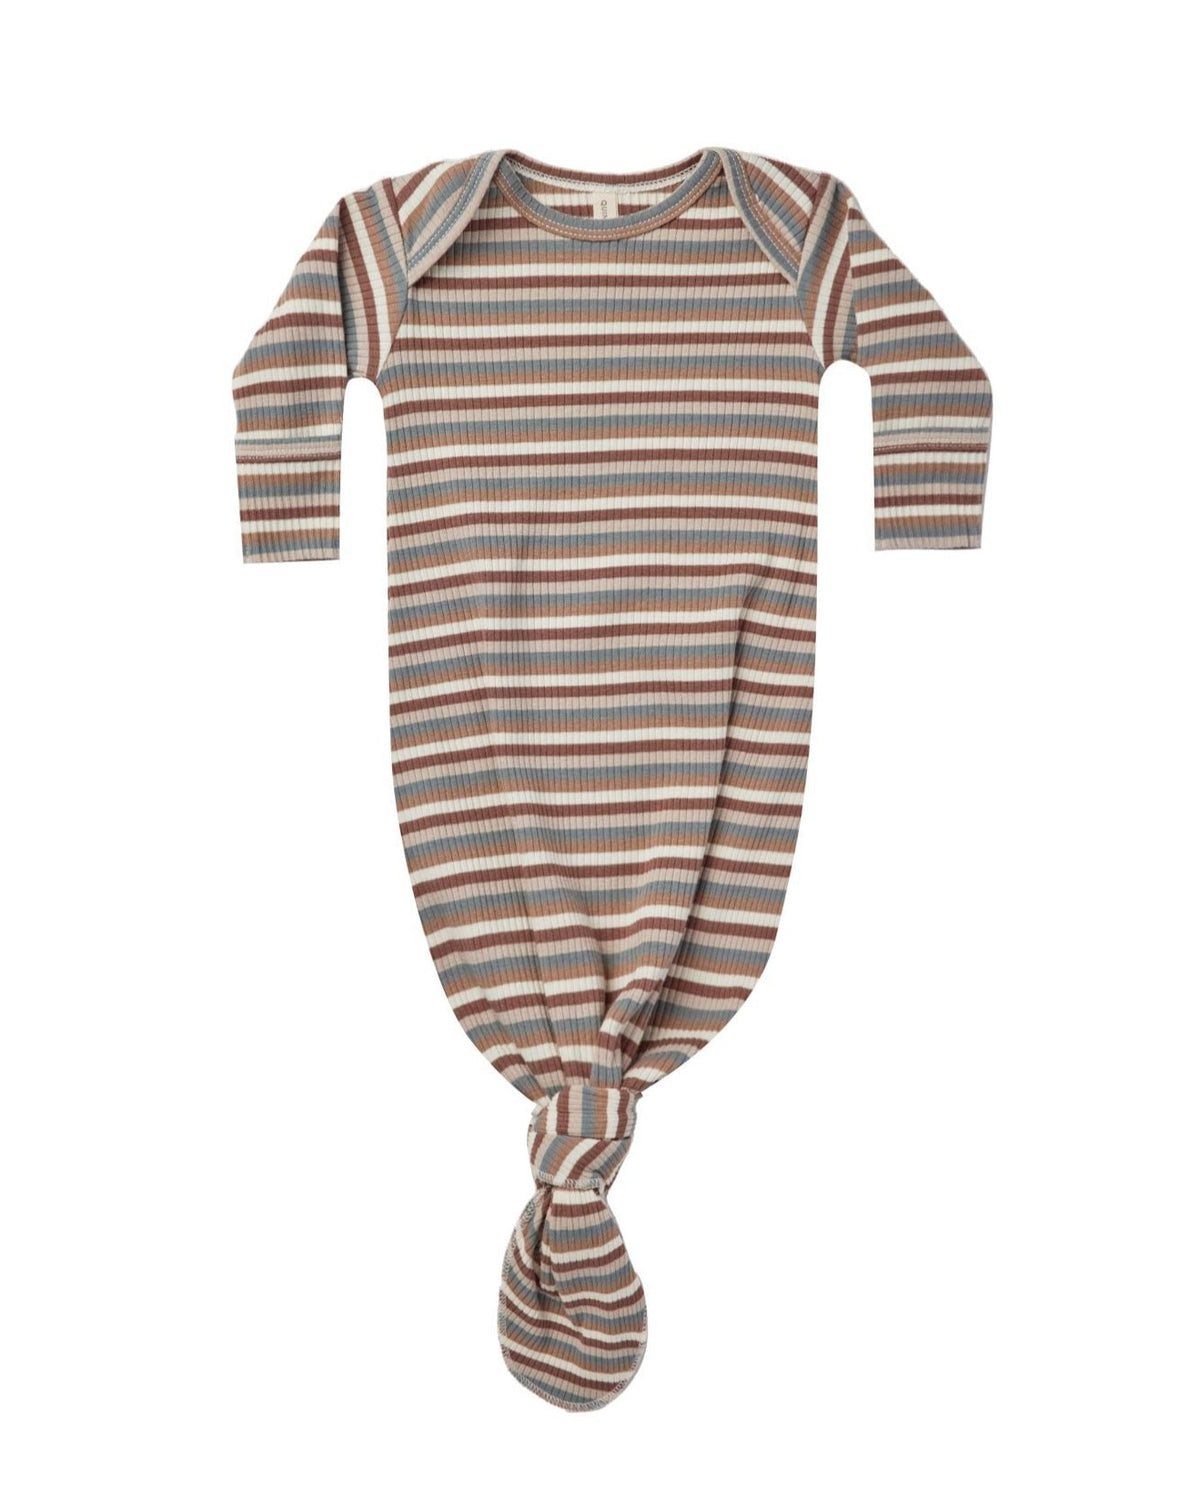 Knotted Baby Gown - Autumn Stripe